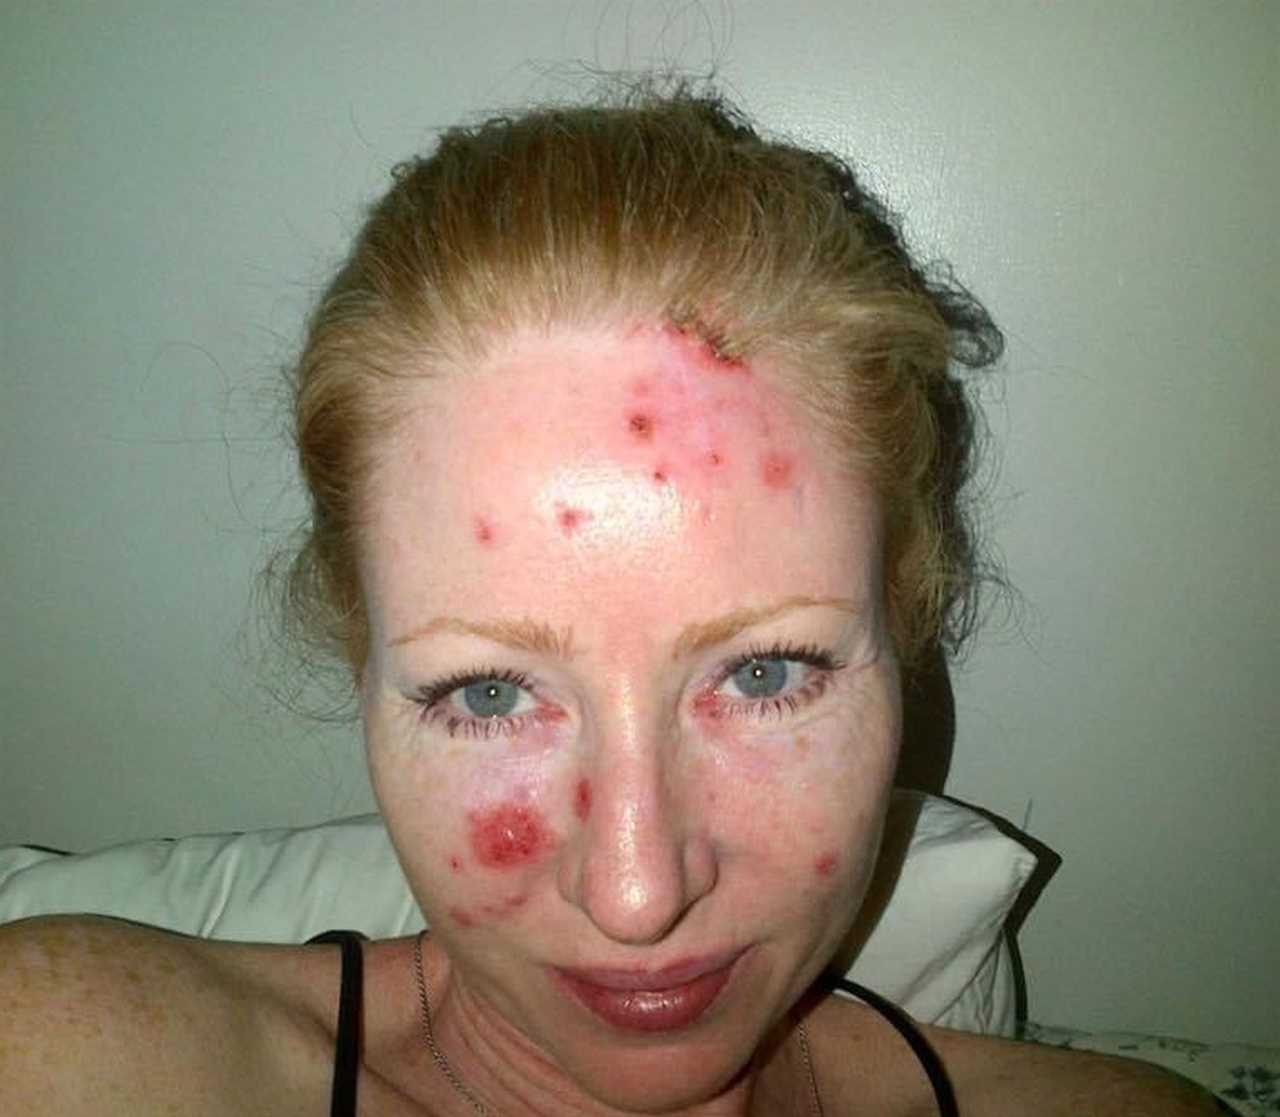 I thought I had eczema on my face but the truth was much worse – I look like an acid attack victim